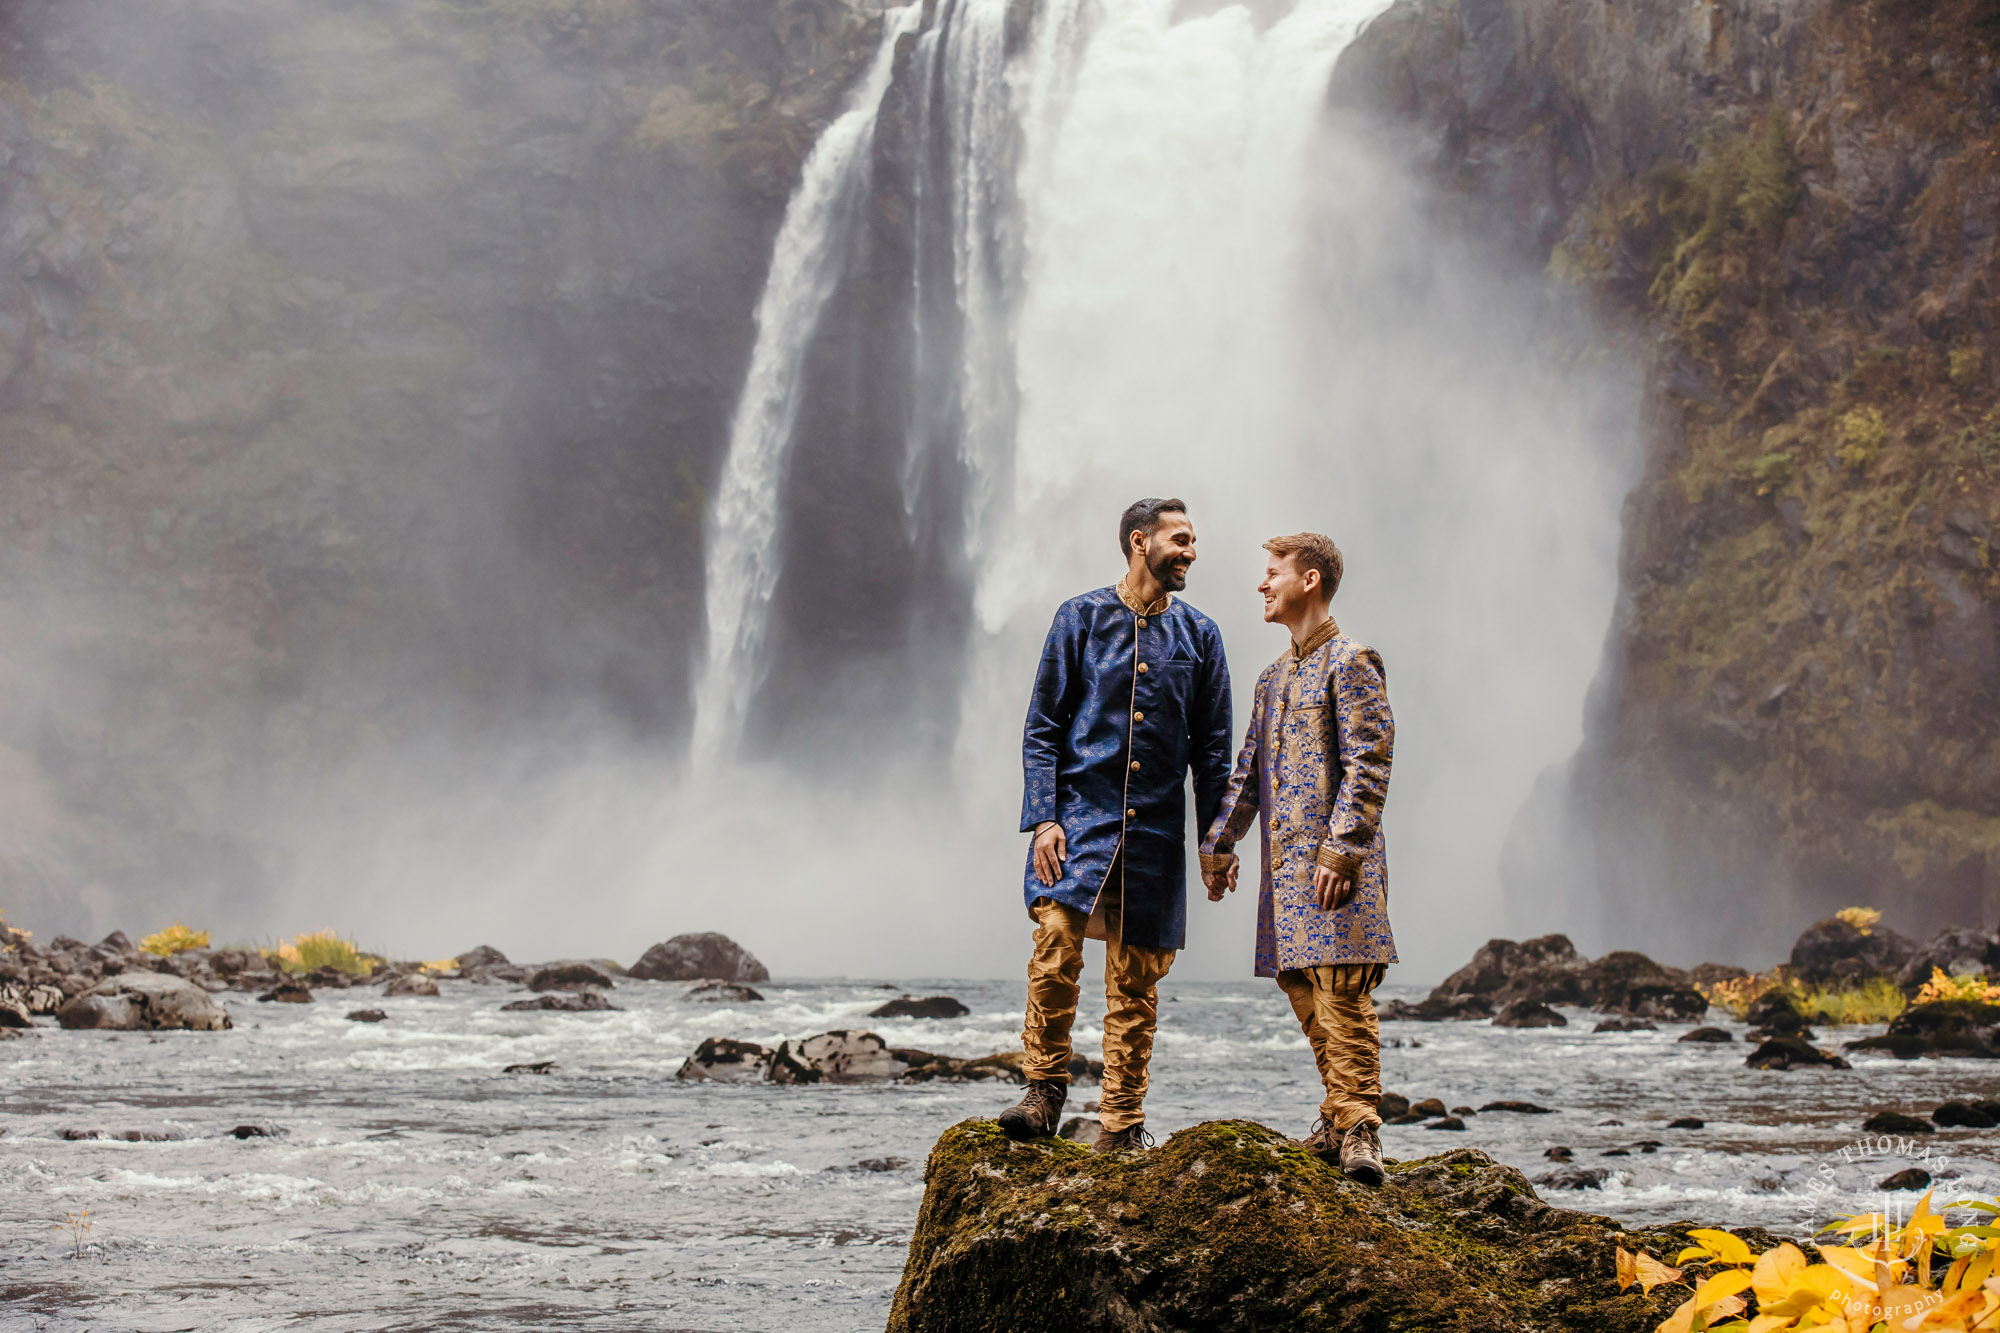 Snoqualmie adventure engagement session by Snoqualmie adventure wedding photographer James Thomas Long Photography